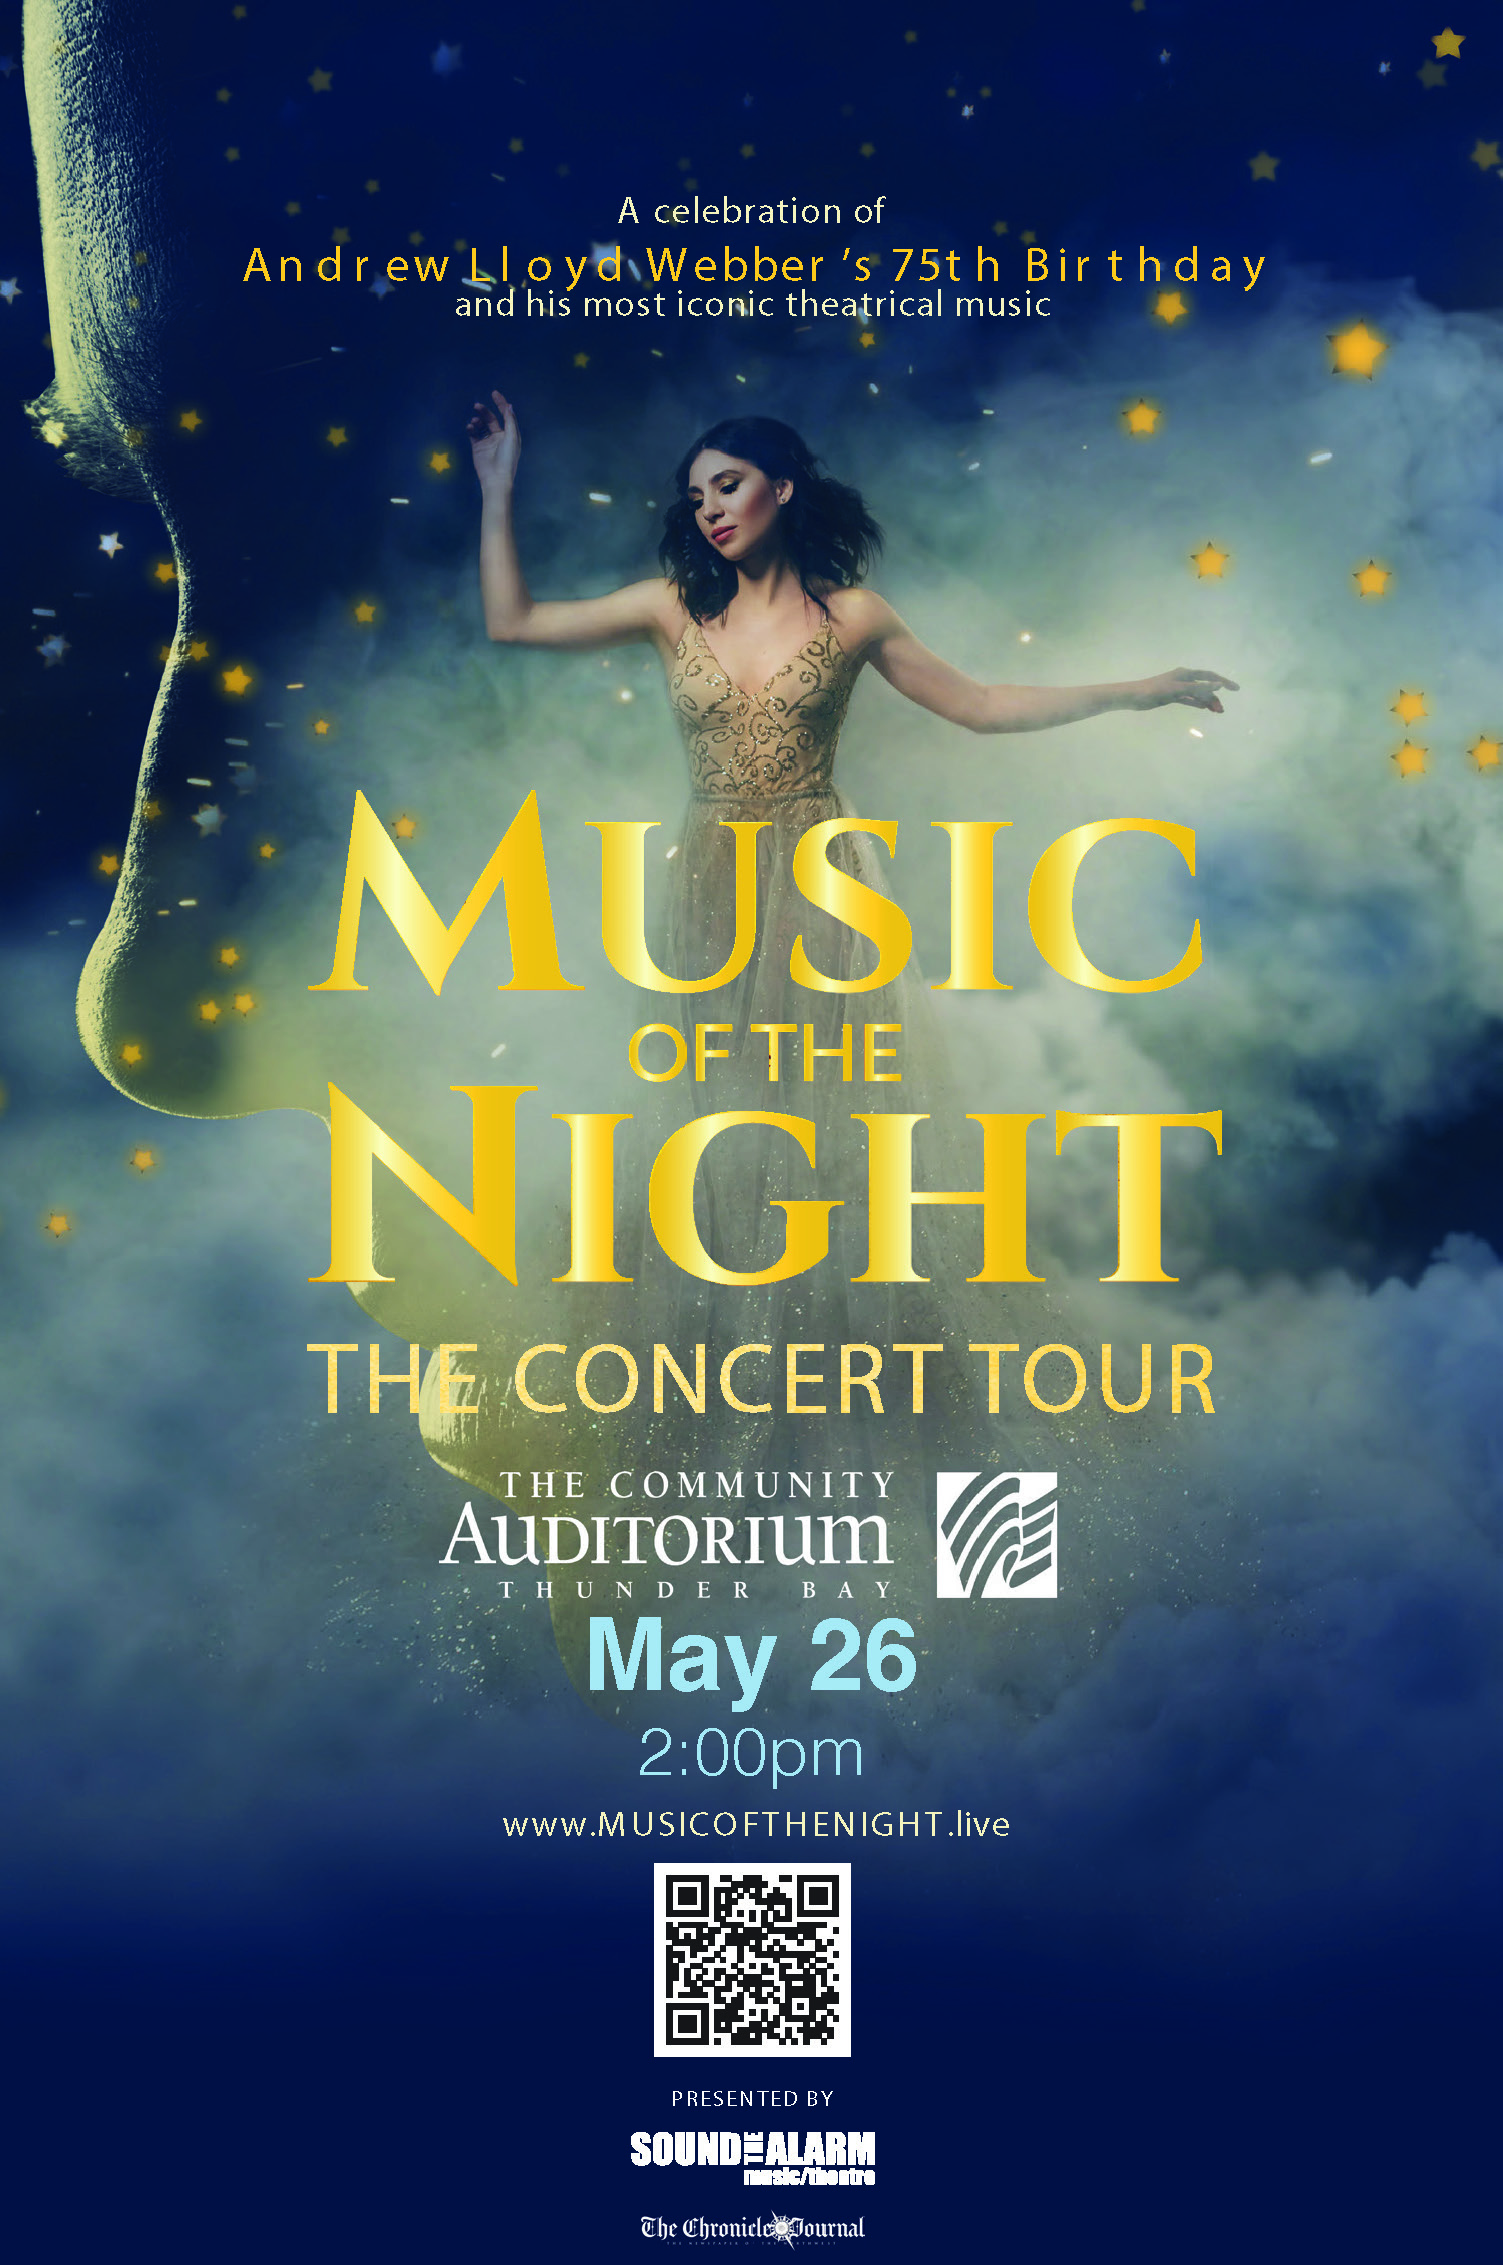 Music of the Night - The Concert Tour